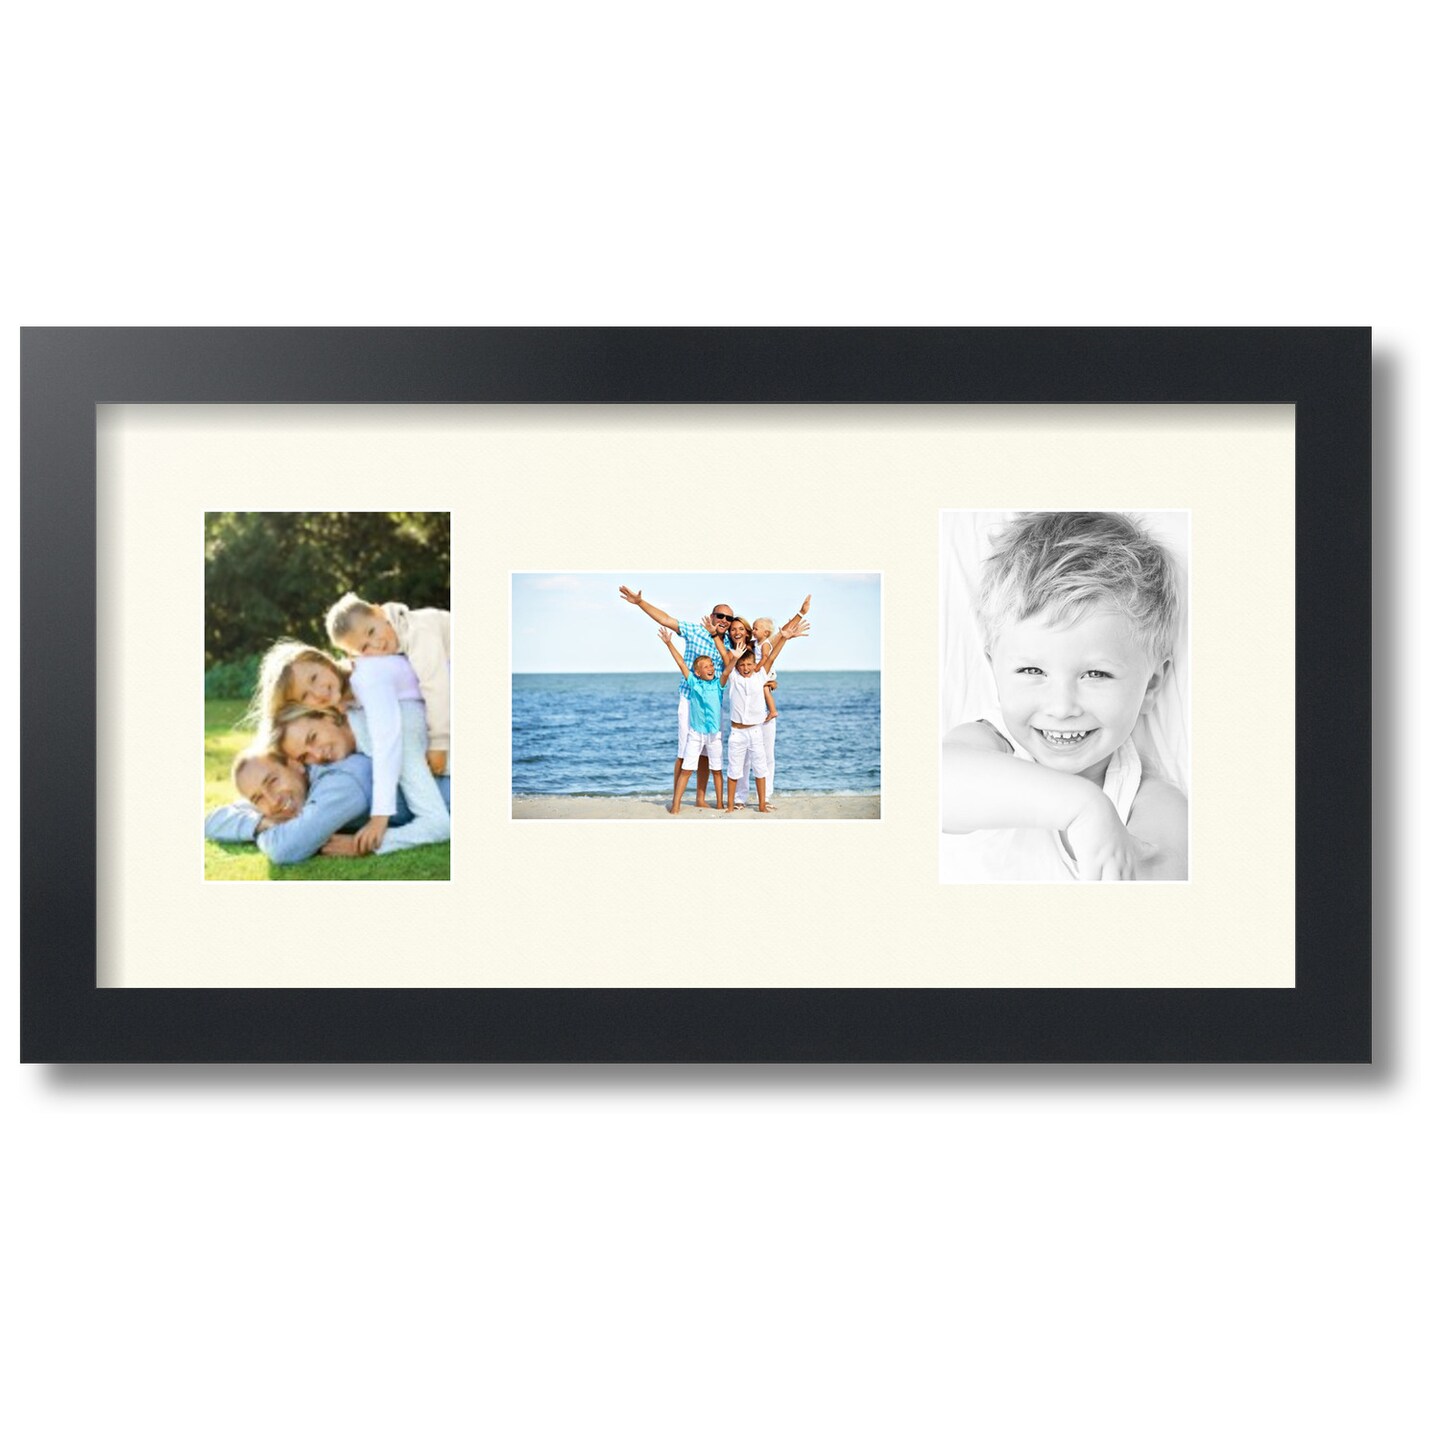 ArtToFrames Collage Photo Picture Frame with 3 - 4x6 inch Openings, Framed in Black with Over 62 Mat Color Options and Regular Glass (CSM-3926-113)